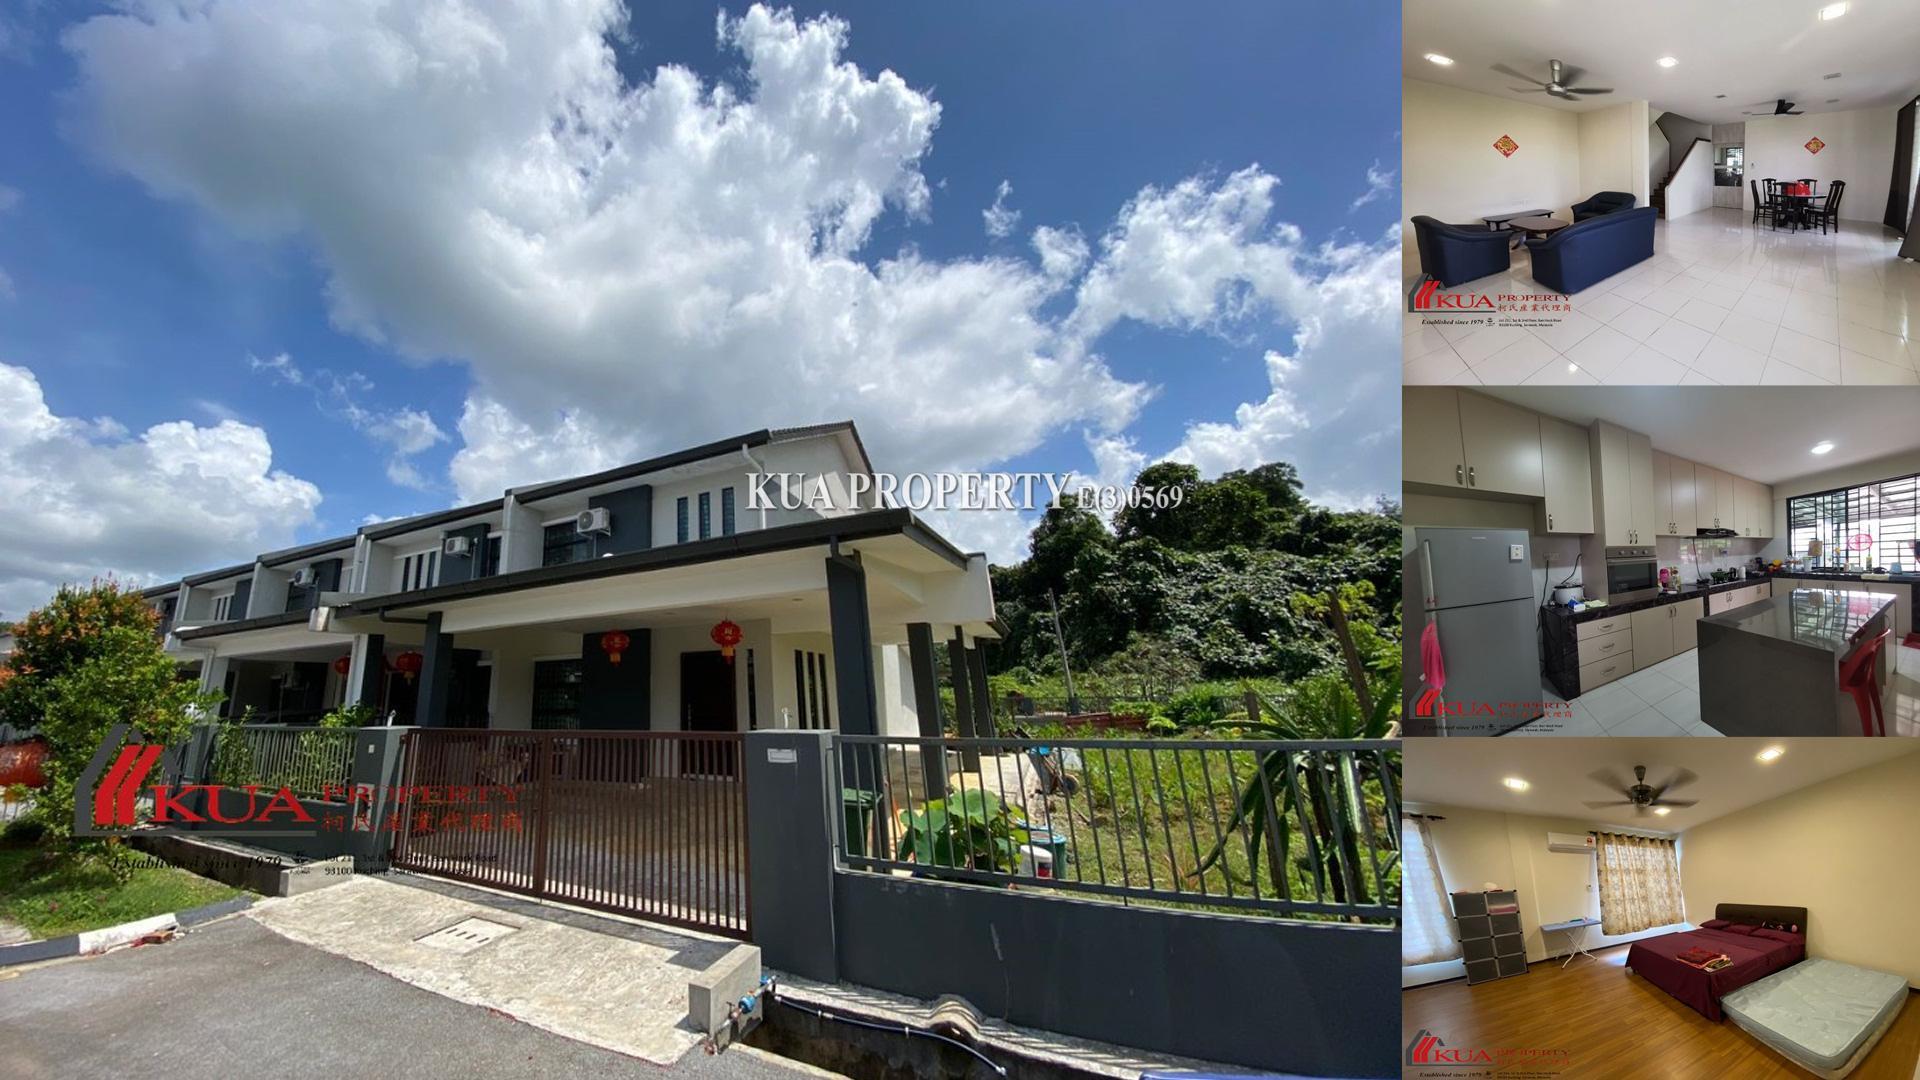 Double Storey Terrace Corner House For Rent! at Moyan Residence